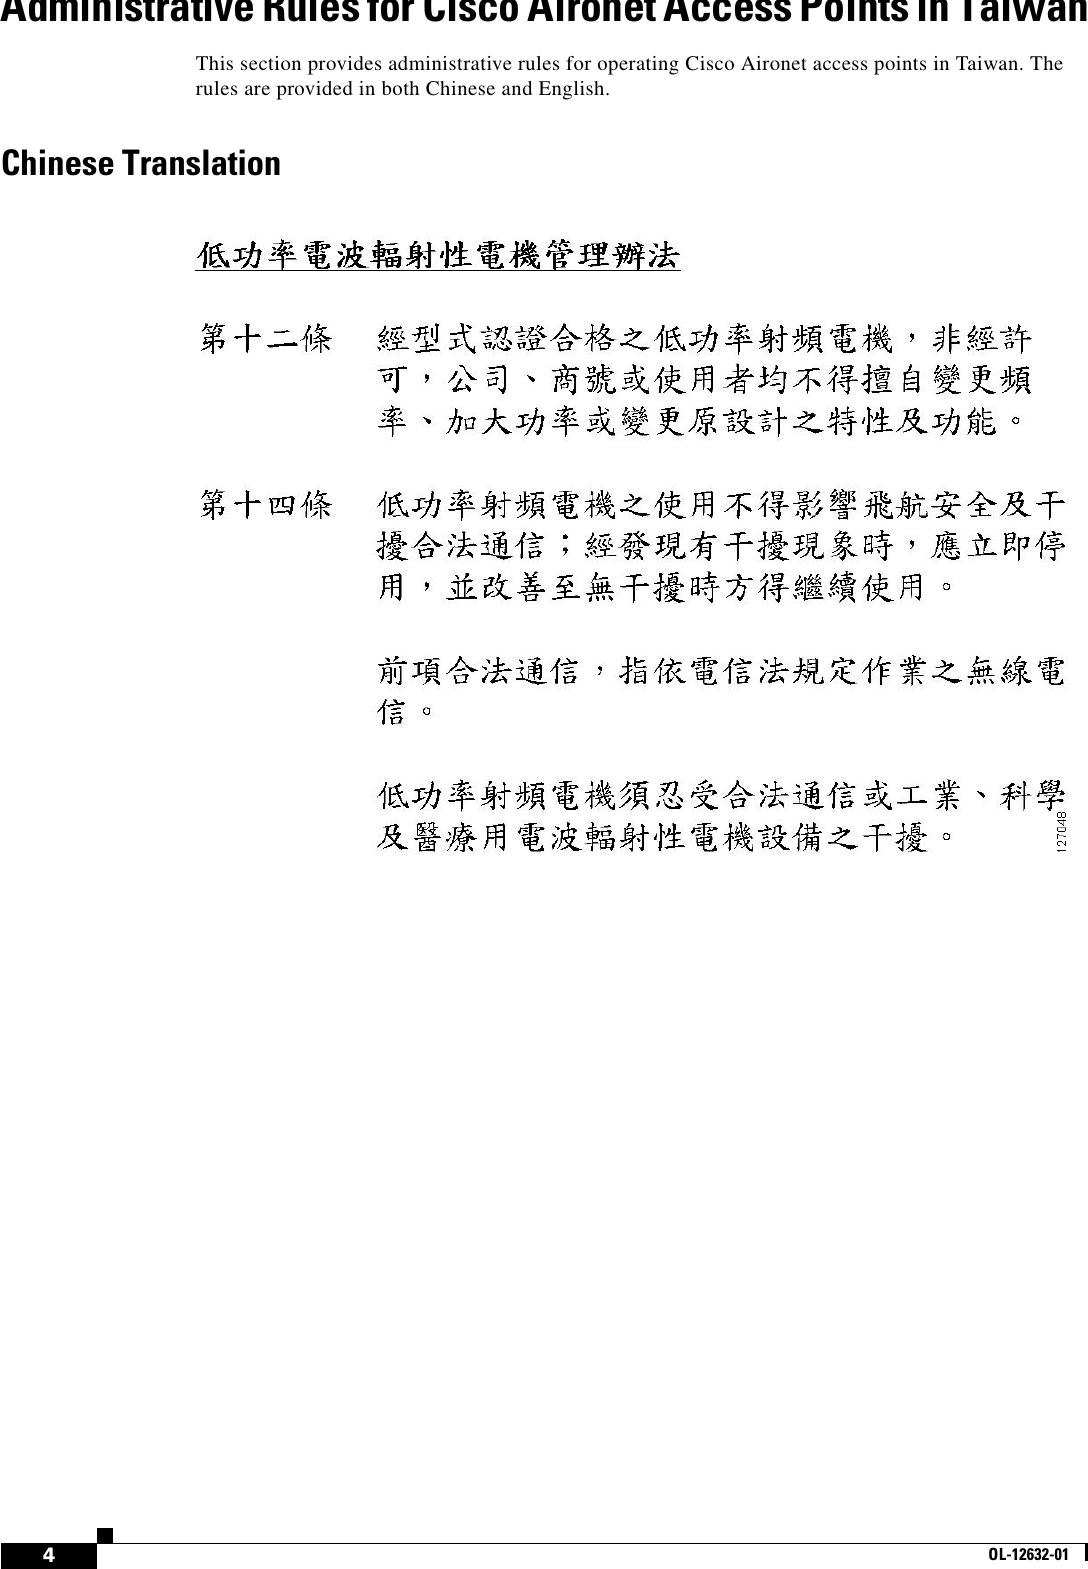 4OL-12632-01Administrative Rules for Cisco Aironet Access Points in TaiwanThis section provides administrative rules for operating Cisco Aironet access points in Taiwan. The rules are provided in both Chinese and English.Chinese Translation